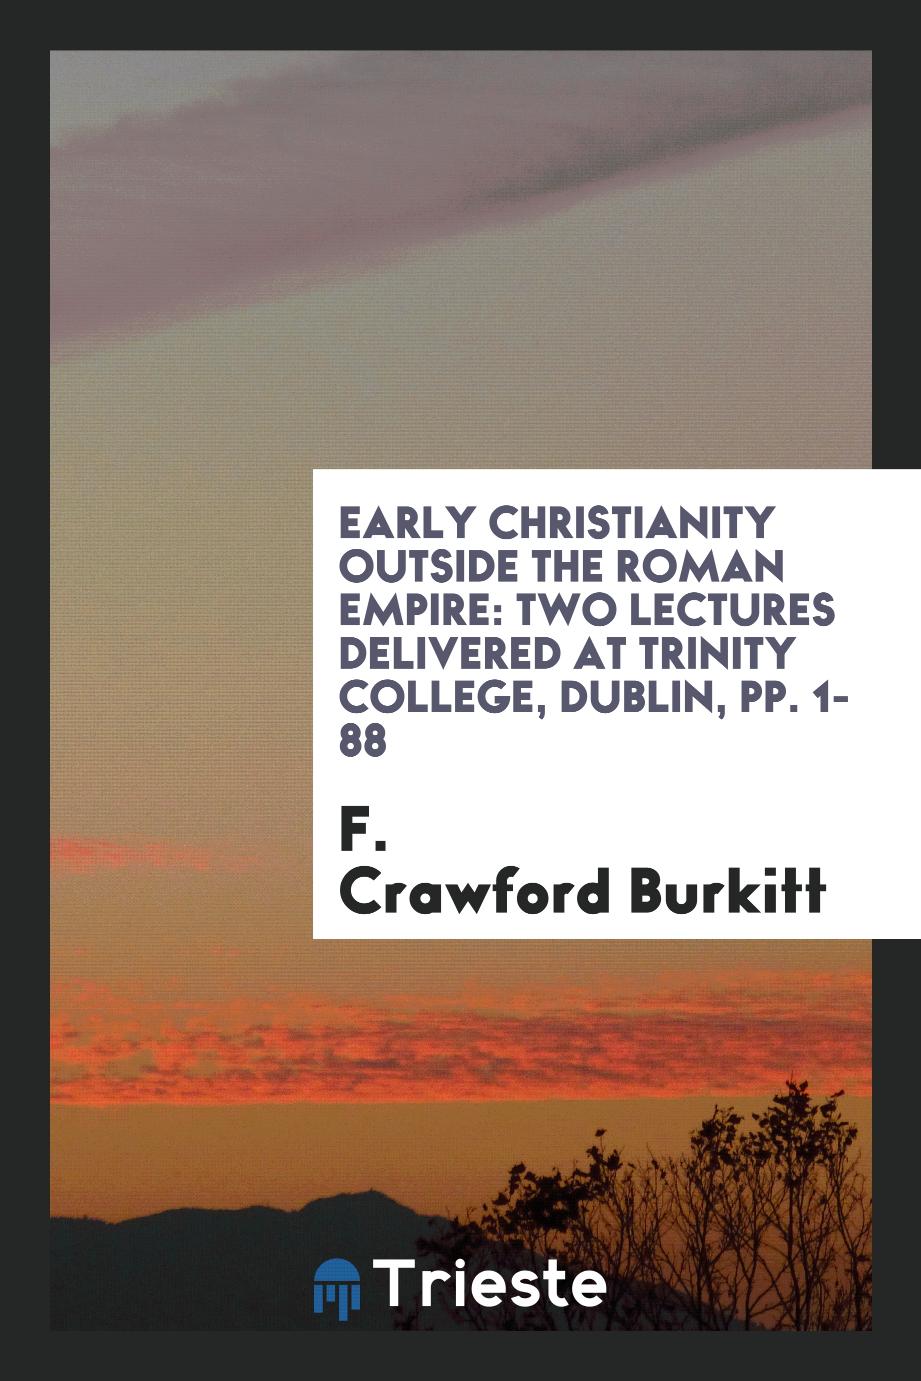 Early Christianity Outside the Roman Empire: Two Lectures Delivered at Trinity College, Dublin, pp. 1-88